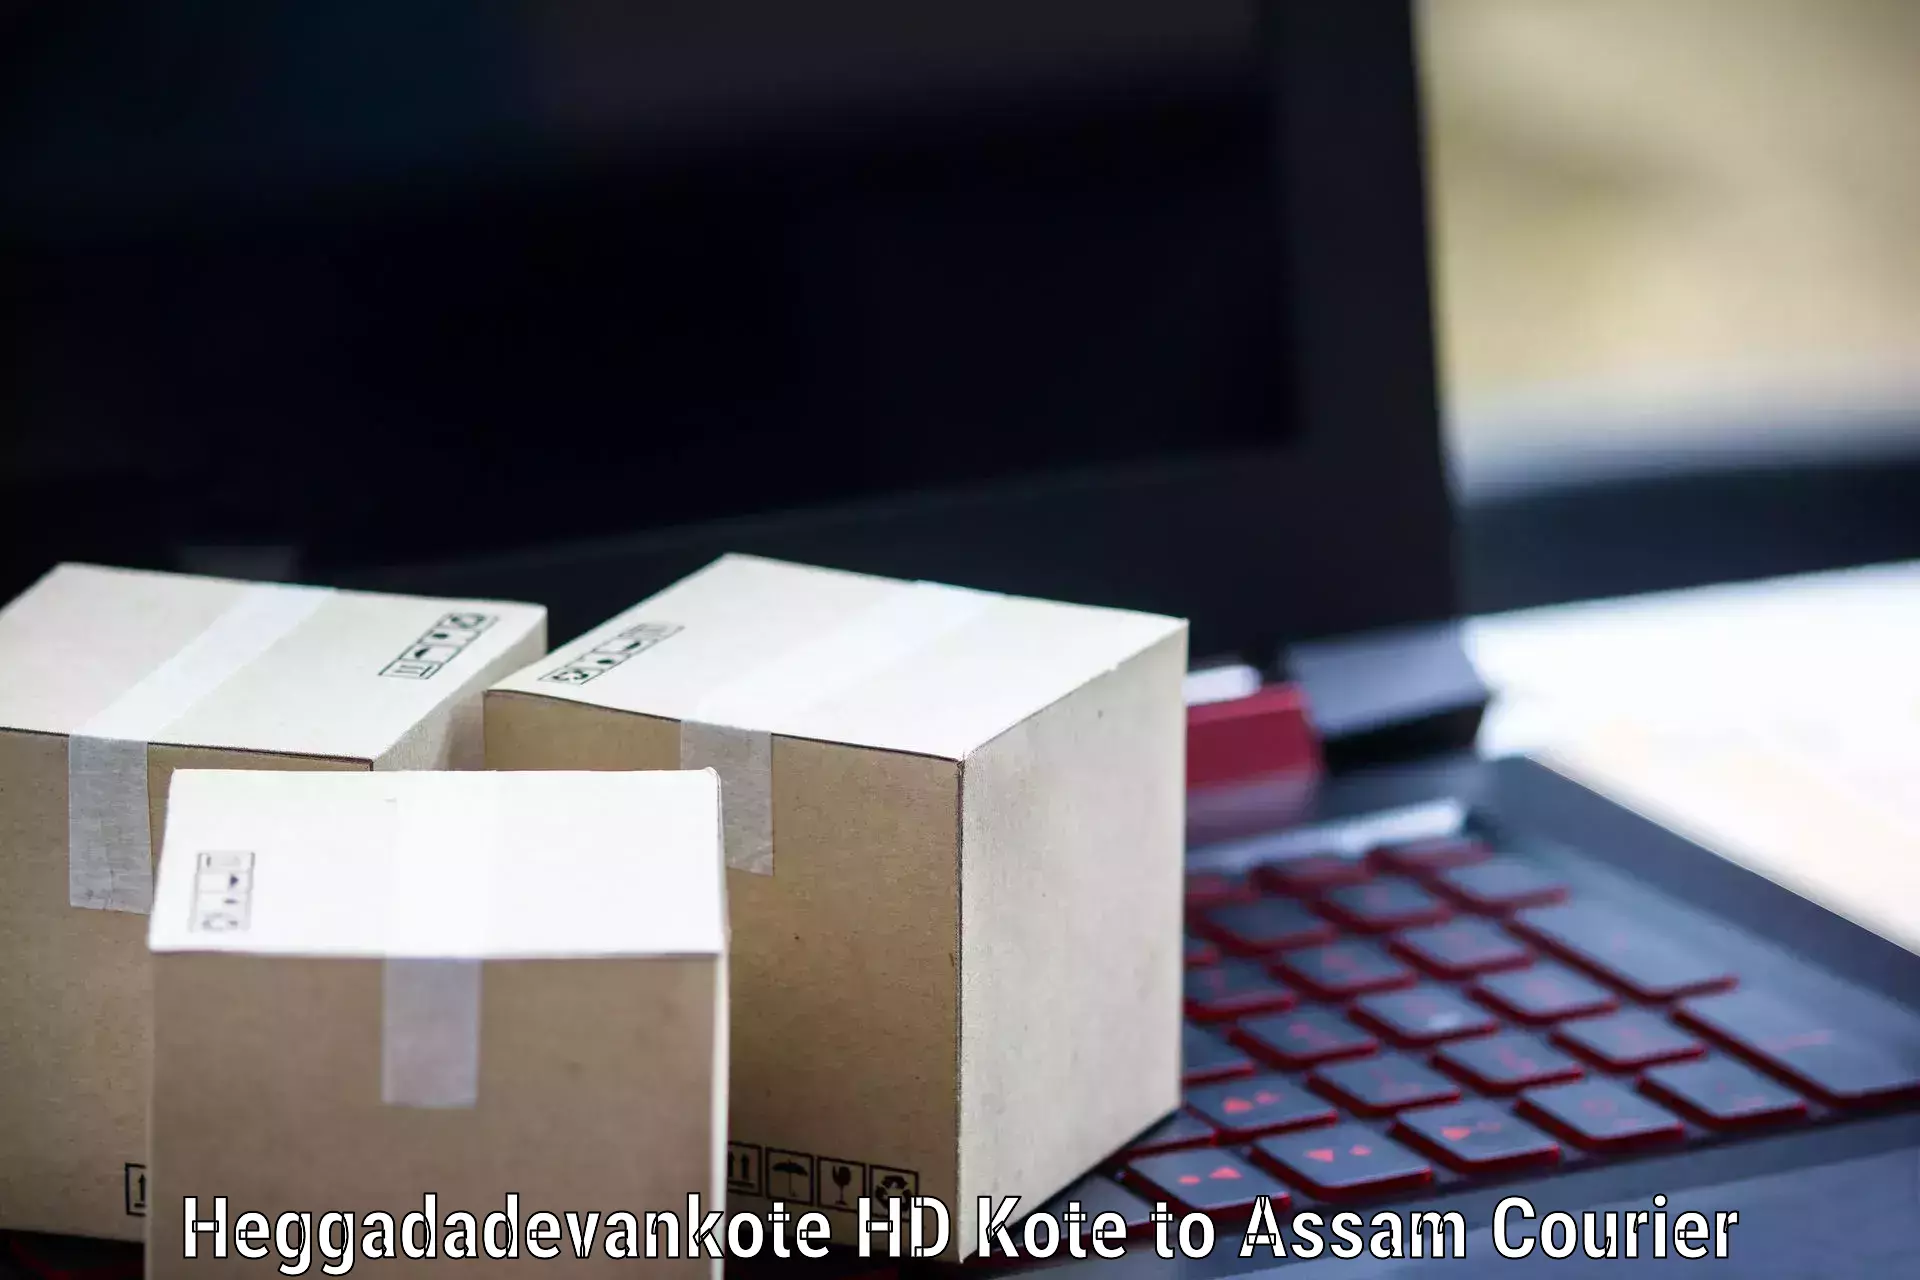 Cost-effective shipping solutions Heggadadevankote HD Kote to Borholla